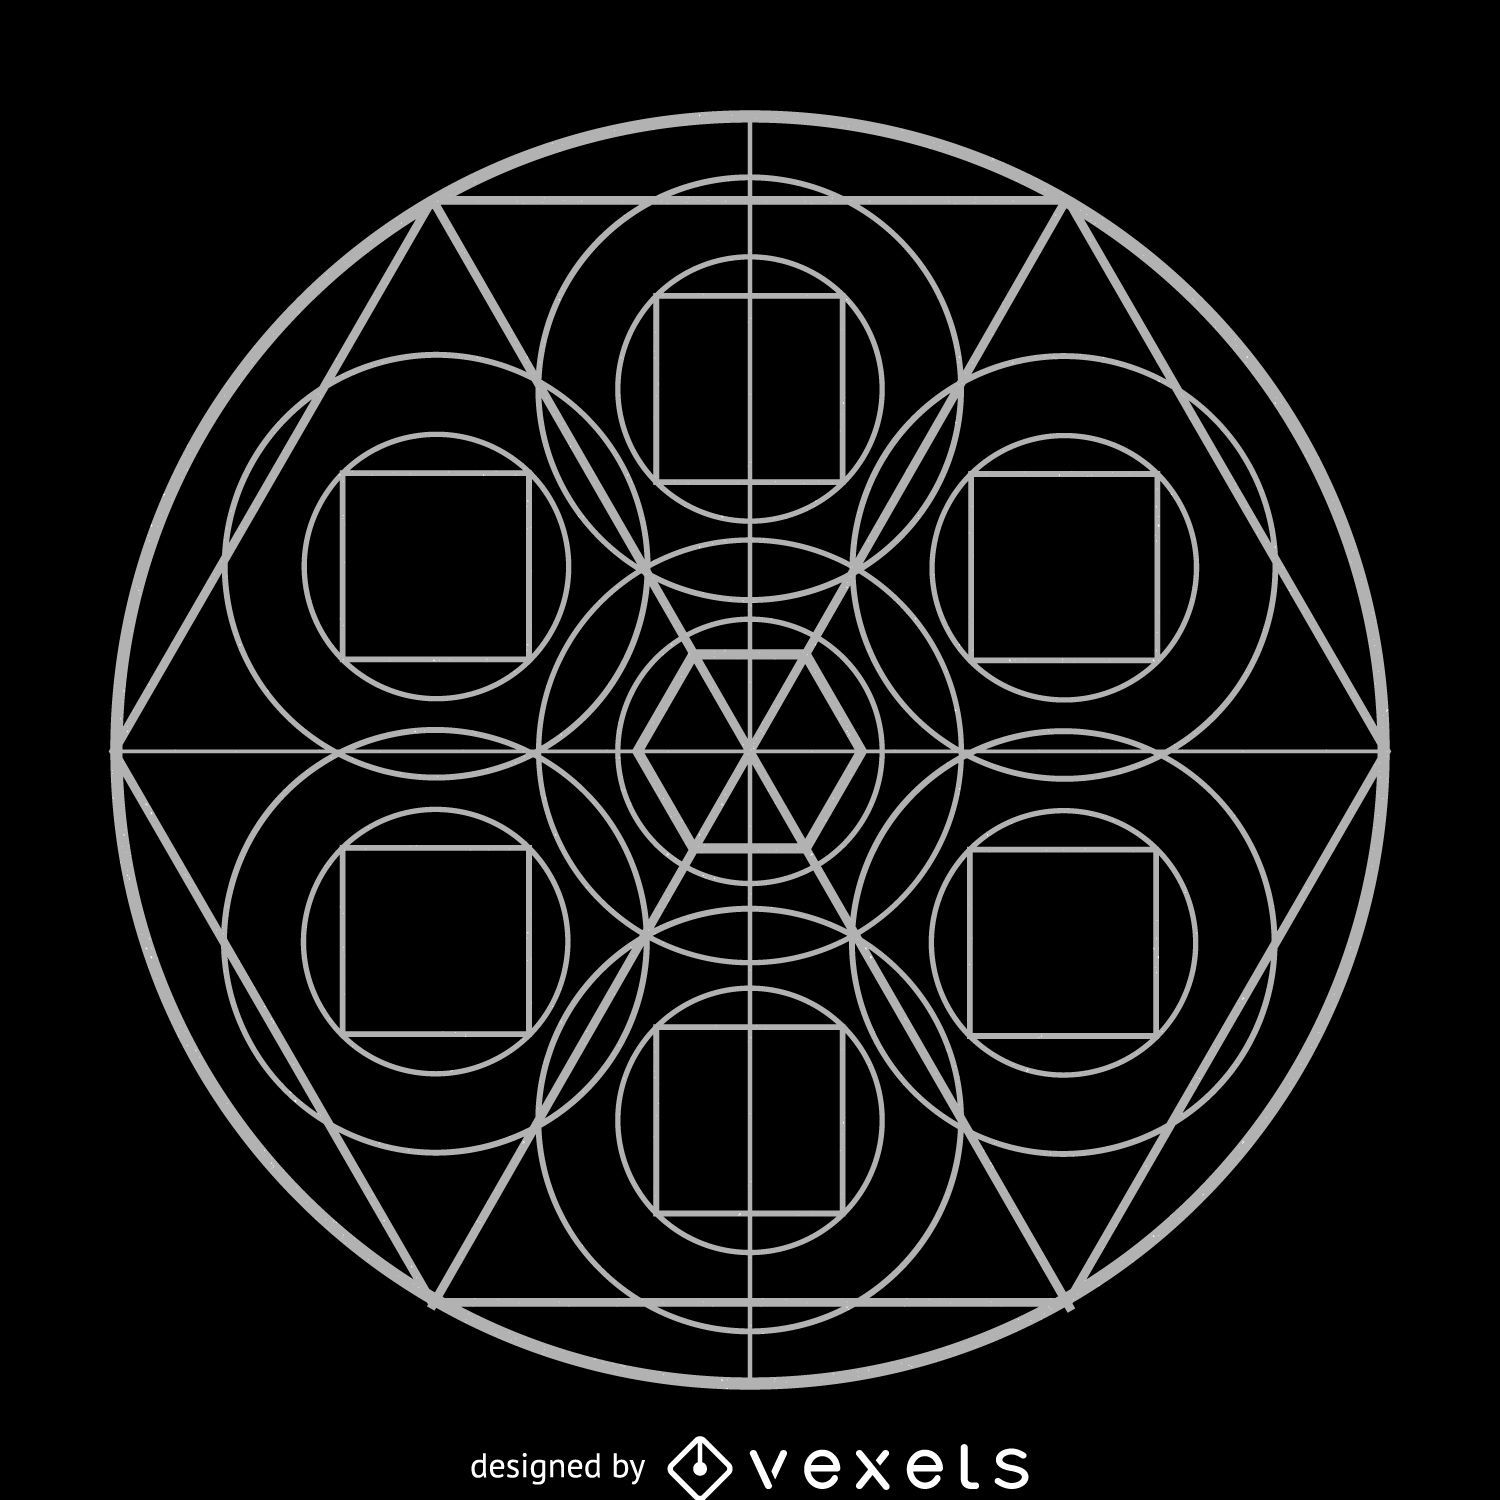 Hexagon formation sacred geometry drawing